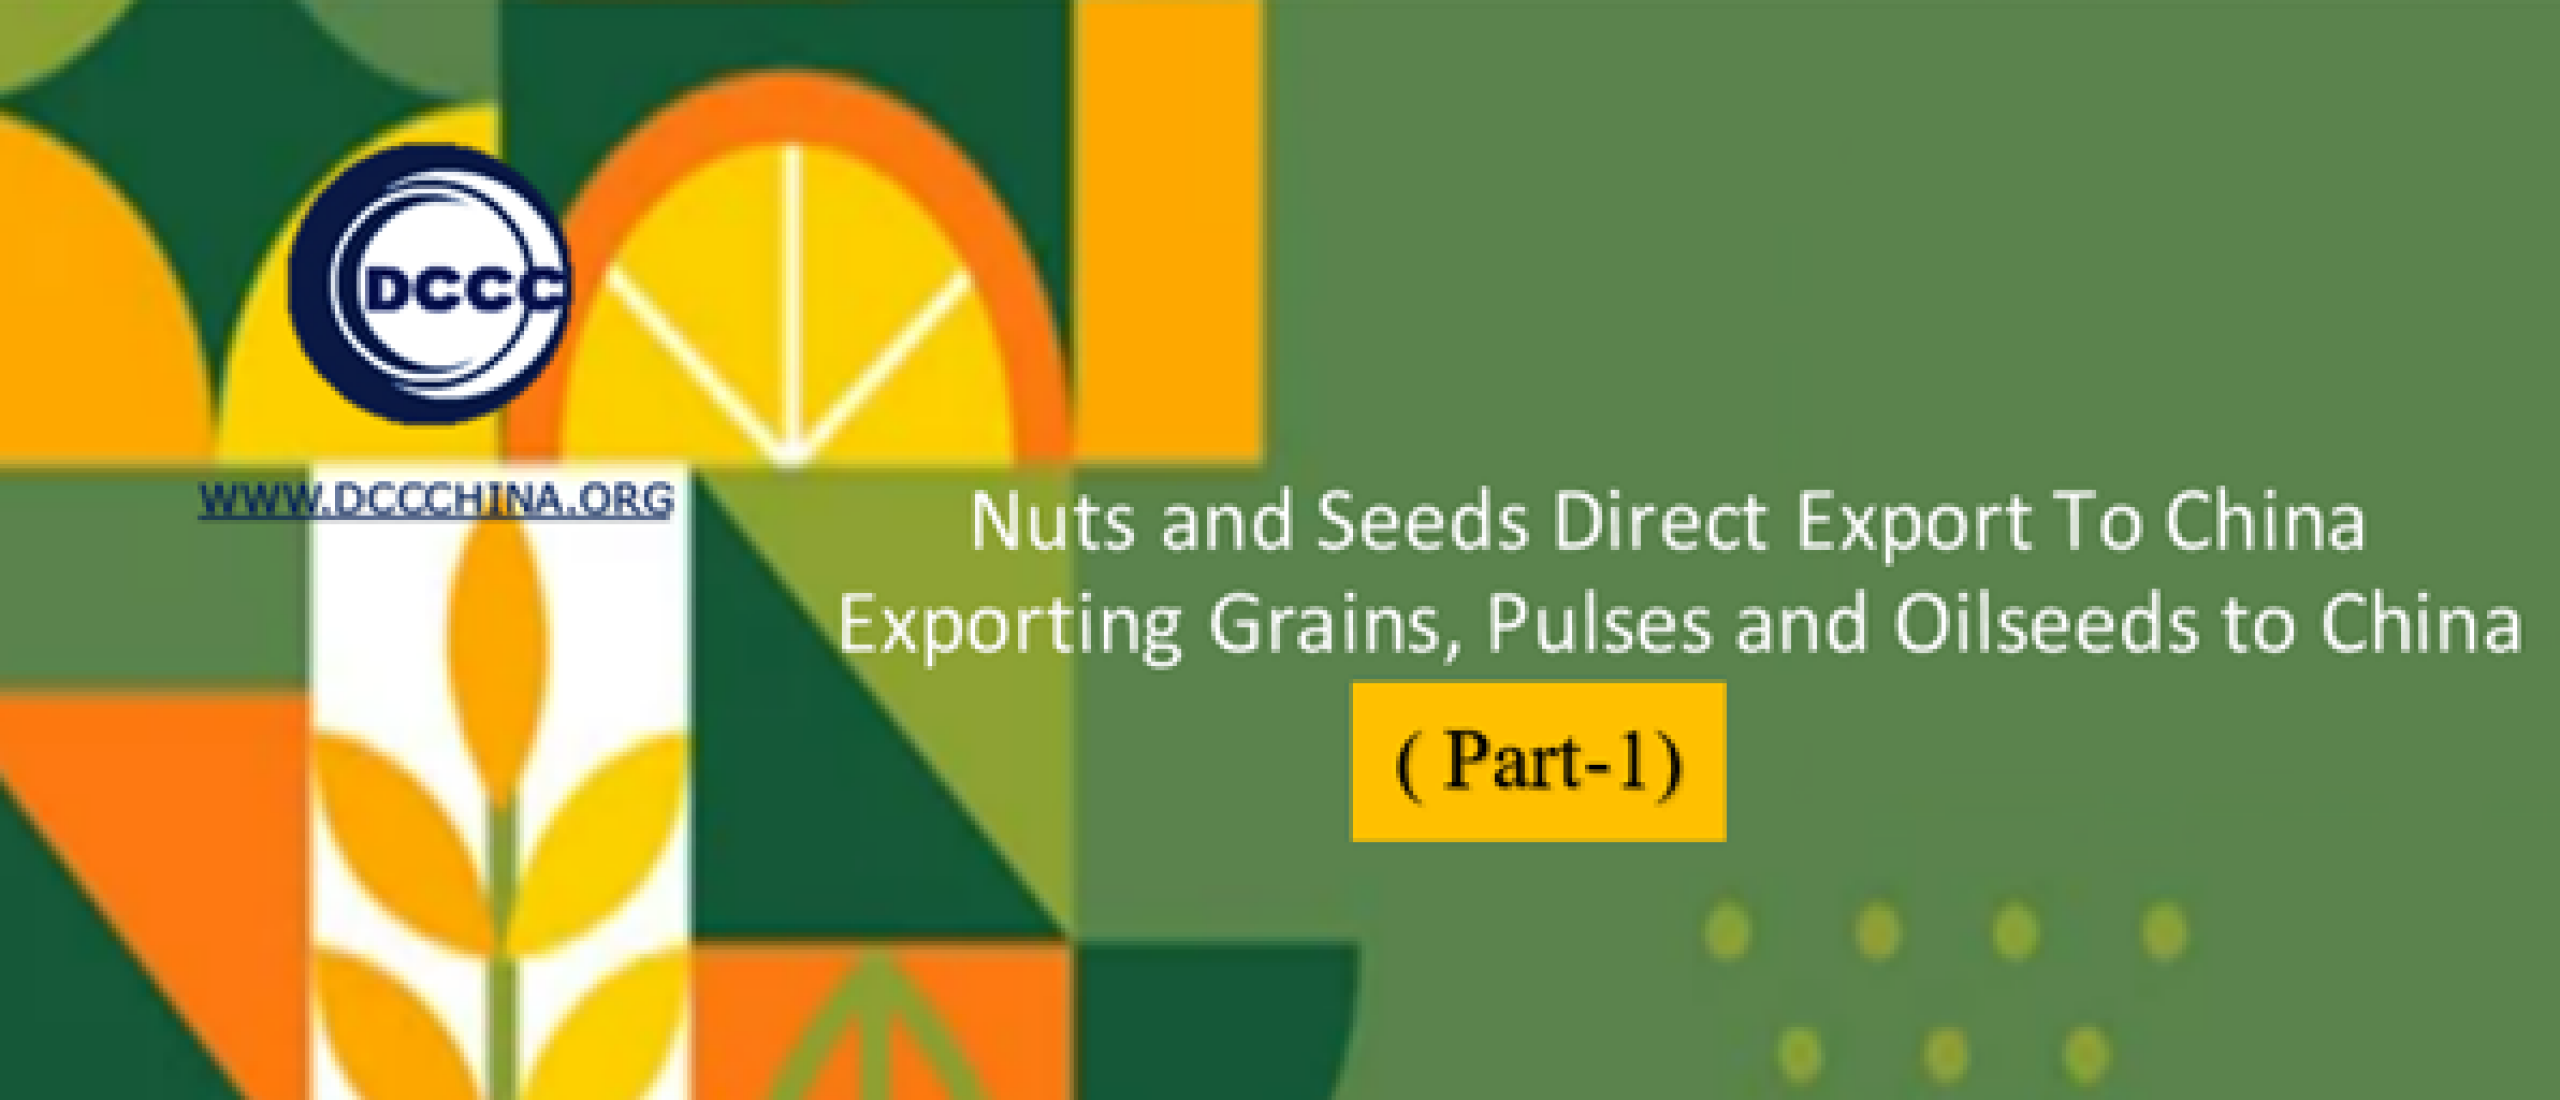 Exporting grains, pulses and oilseed to China: regulations and compliance